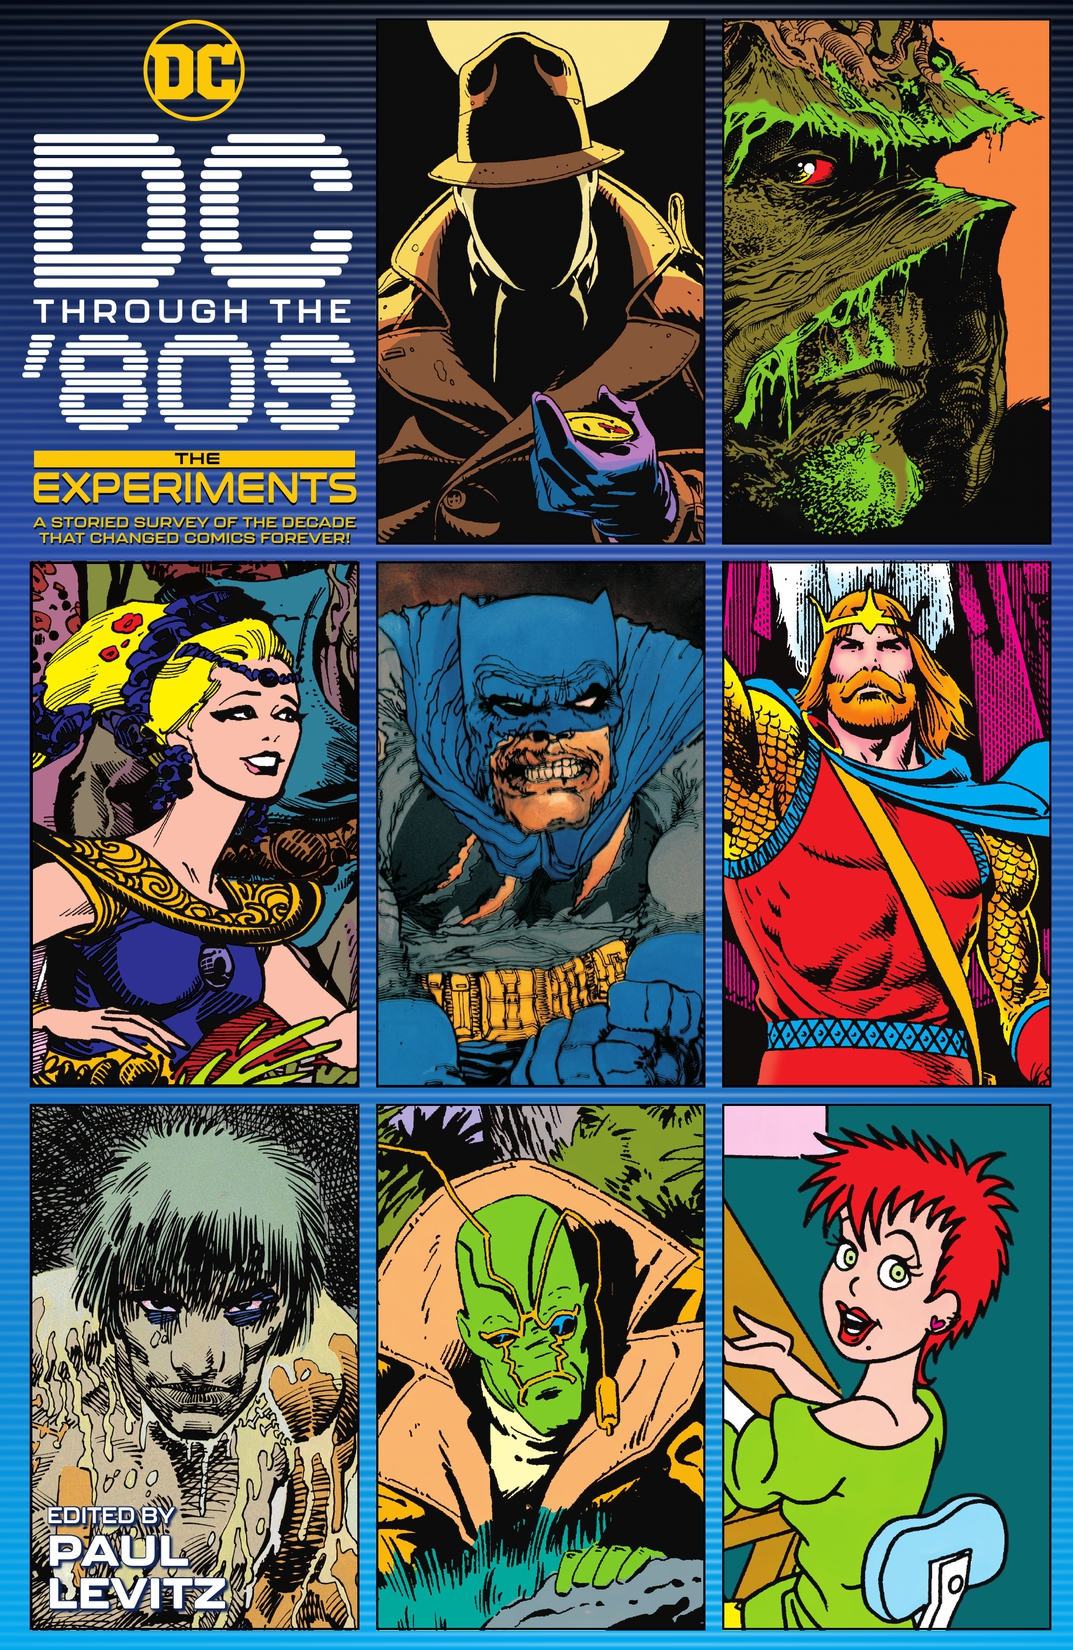 DC Through the 80s: The Experiments preview images